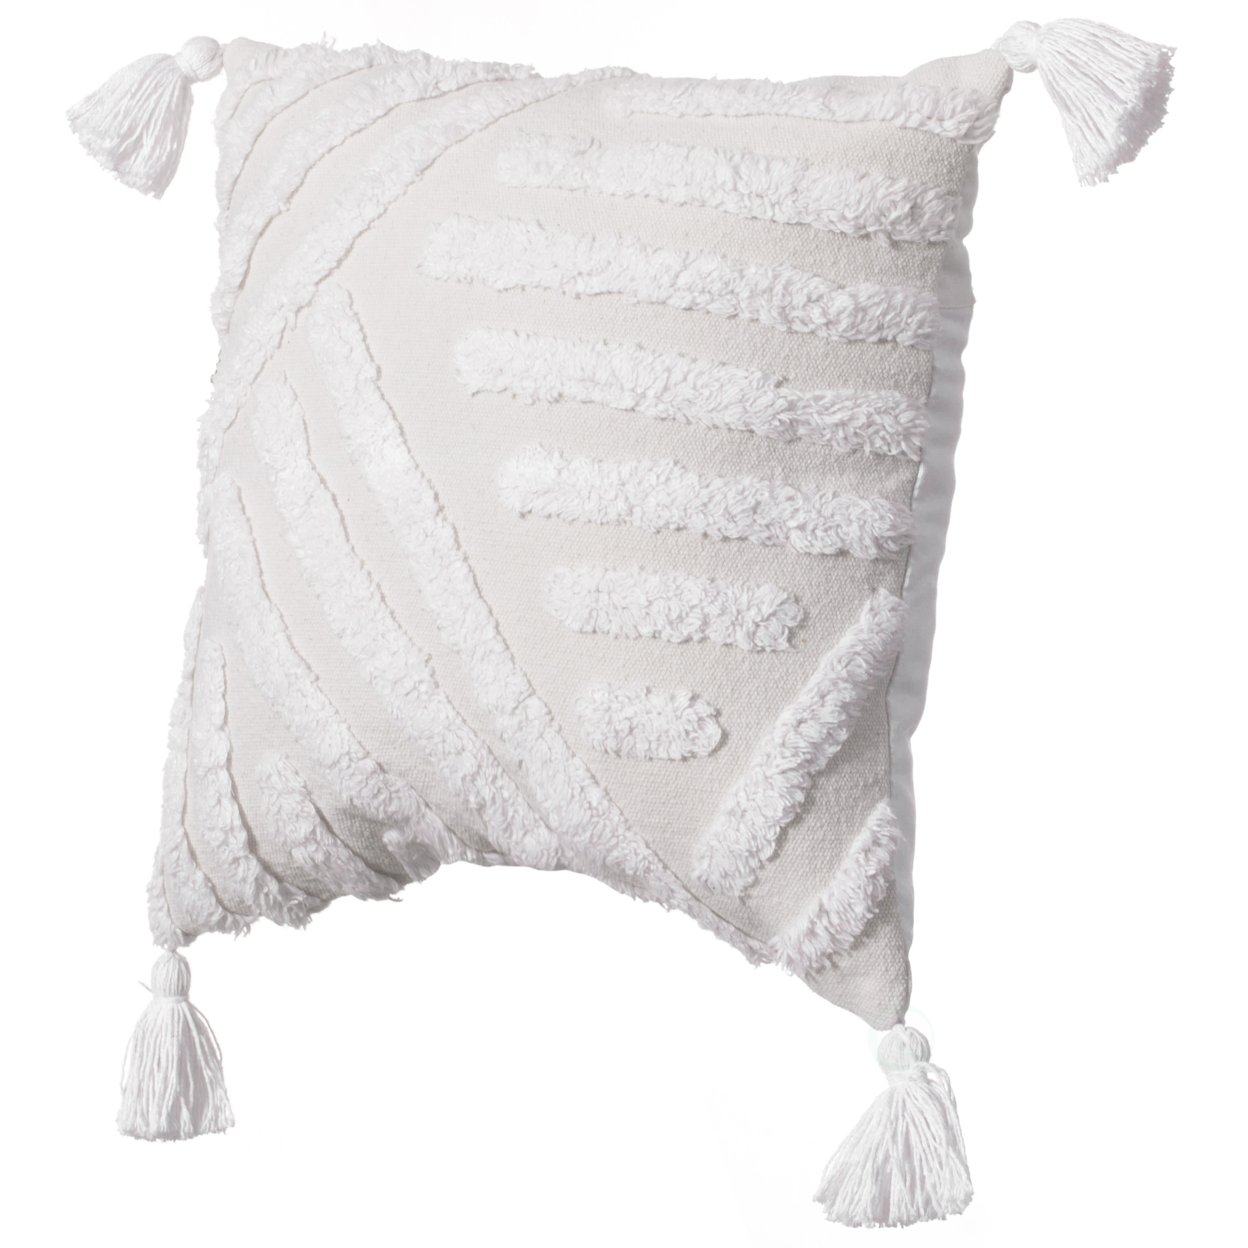 16 Handwoven Cotton Throw Pillow Cover With White Tufted Patterns And Tassel Corners - Line With Cushion